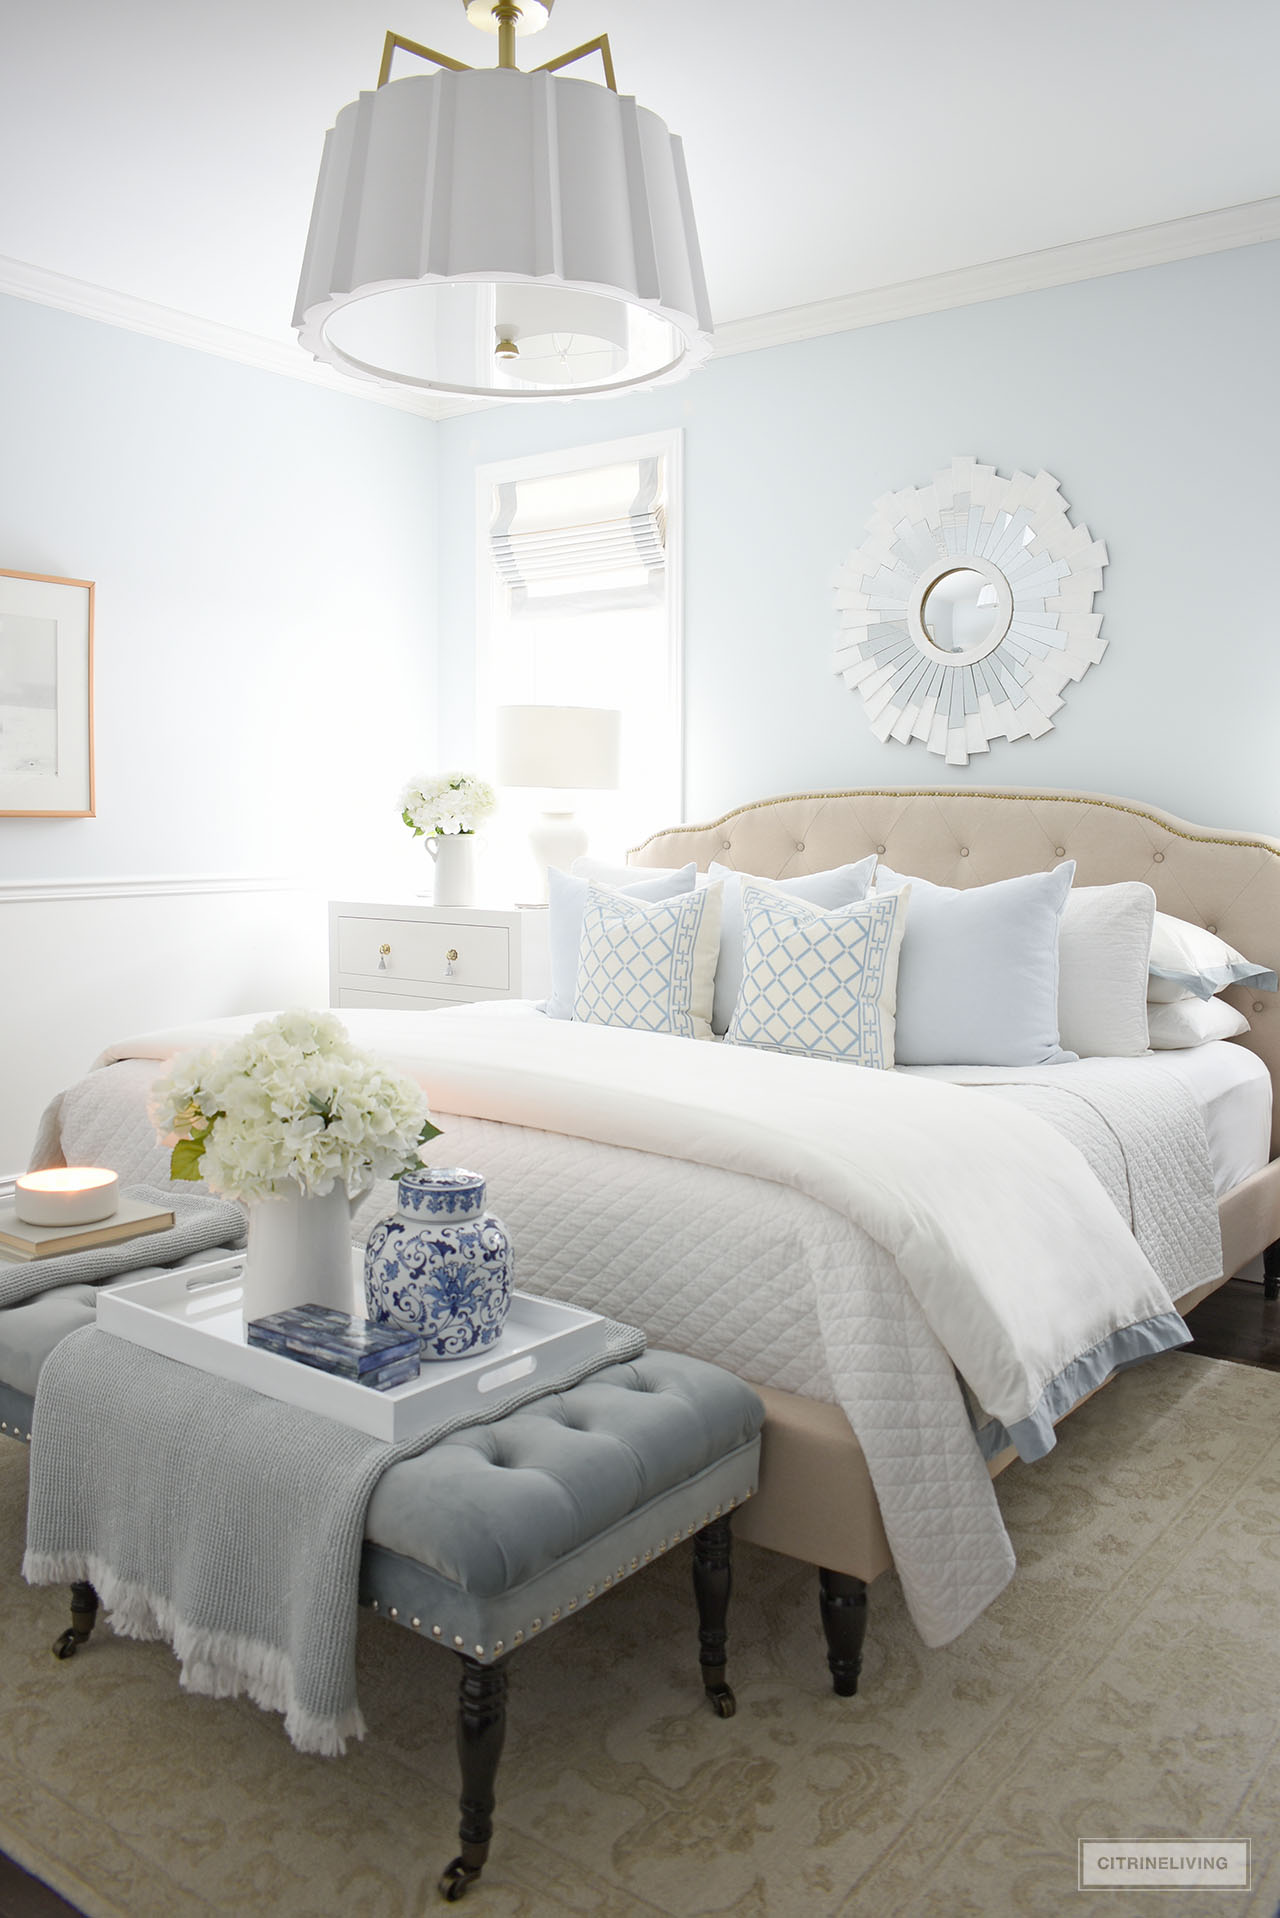 Beautiful calming bedroom with layers of white bedding, light blue throw pillows, throws, candles and faux flowers.